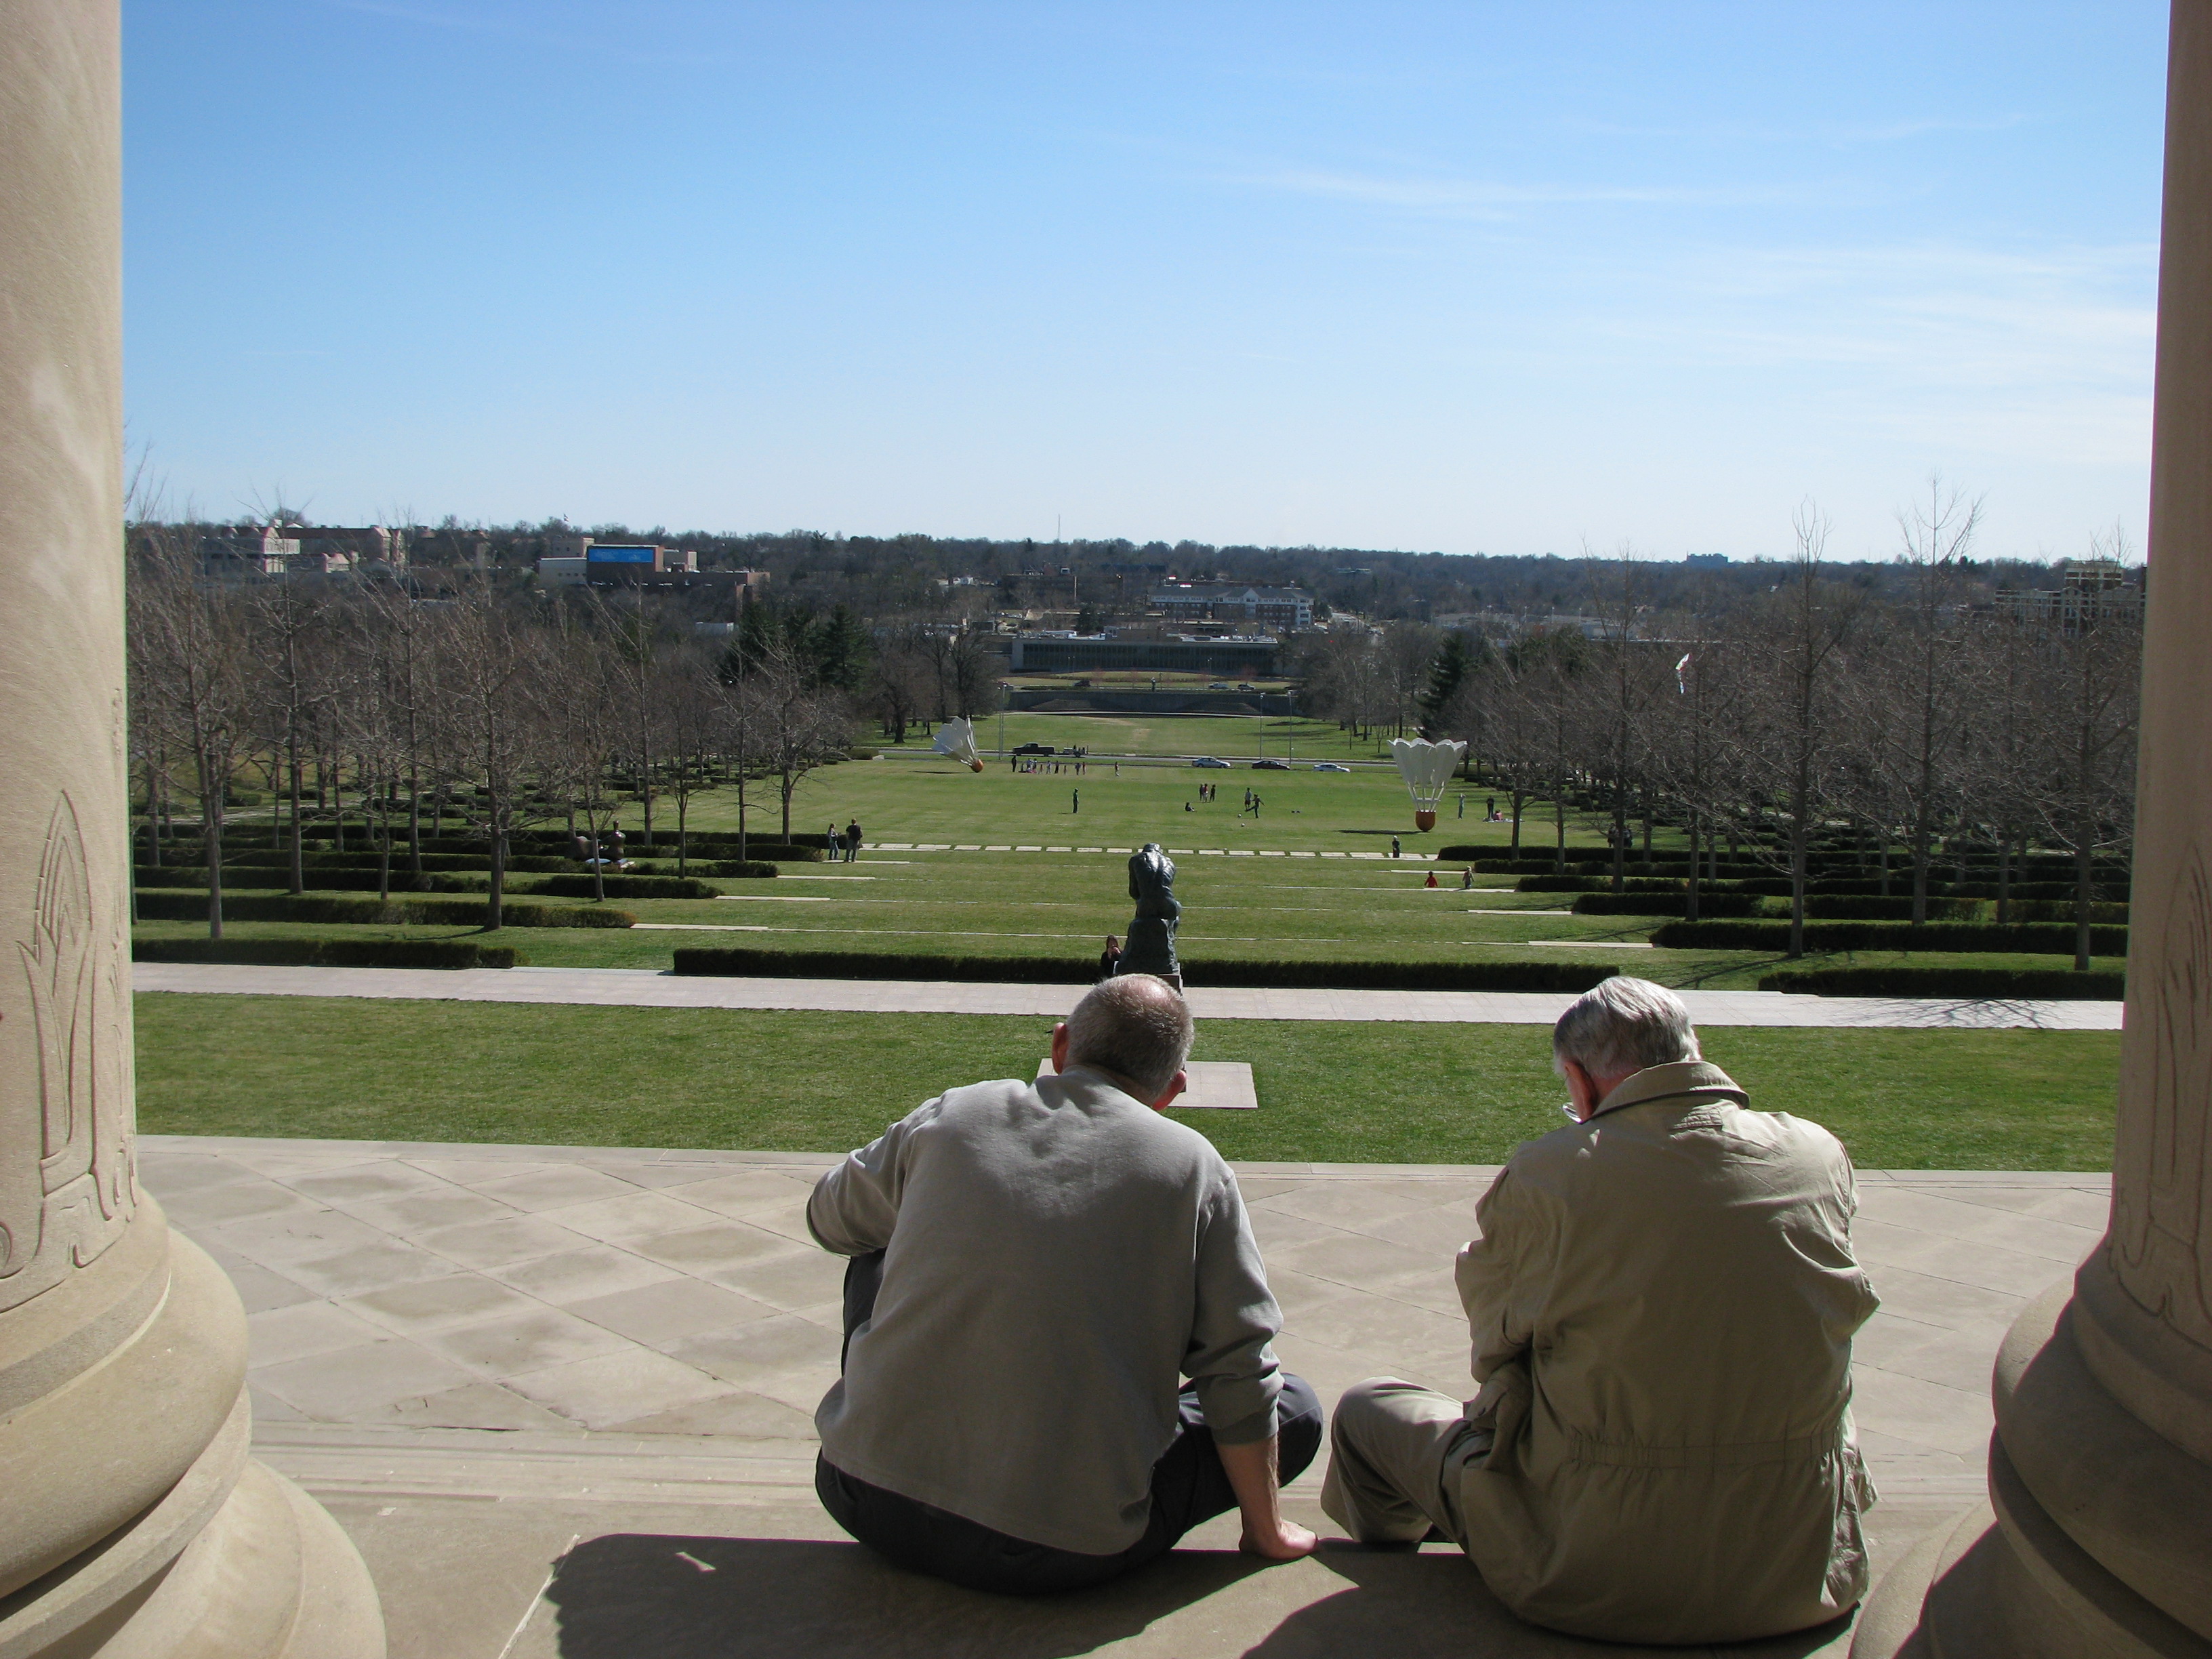 THE LONG LAWN OF NELSON GALLERY KCMO: or where does the bail-out really begin?